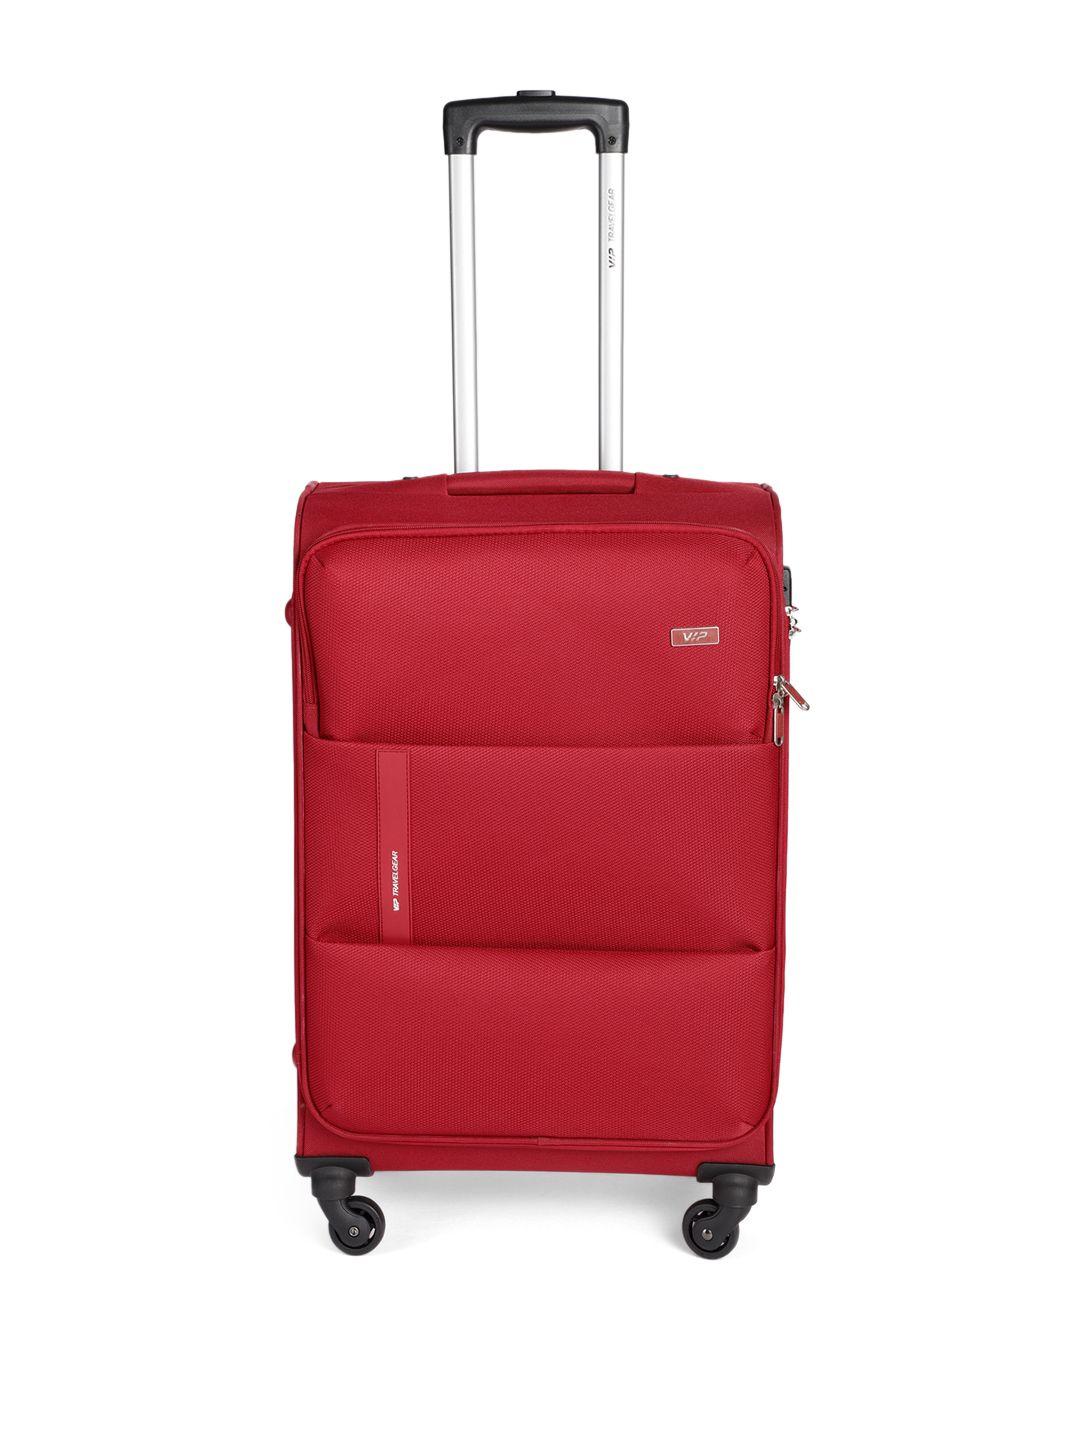 vip red solid medium 360 degree rotatable trolley suitcase